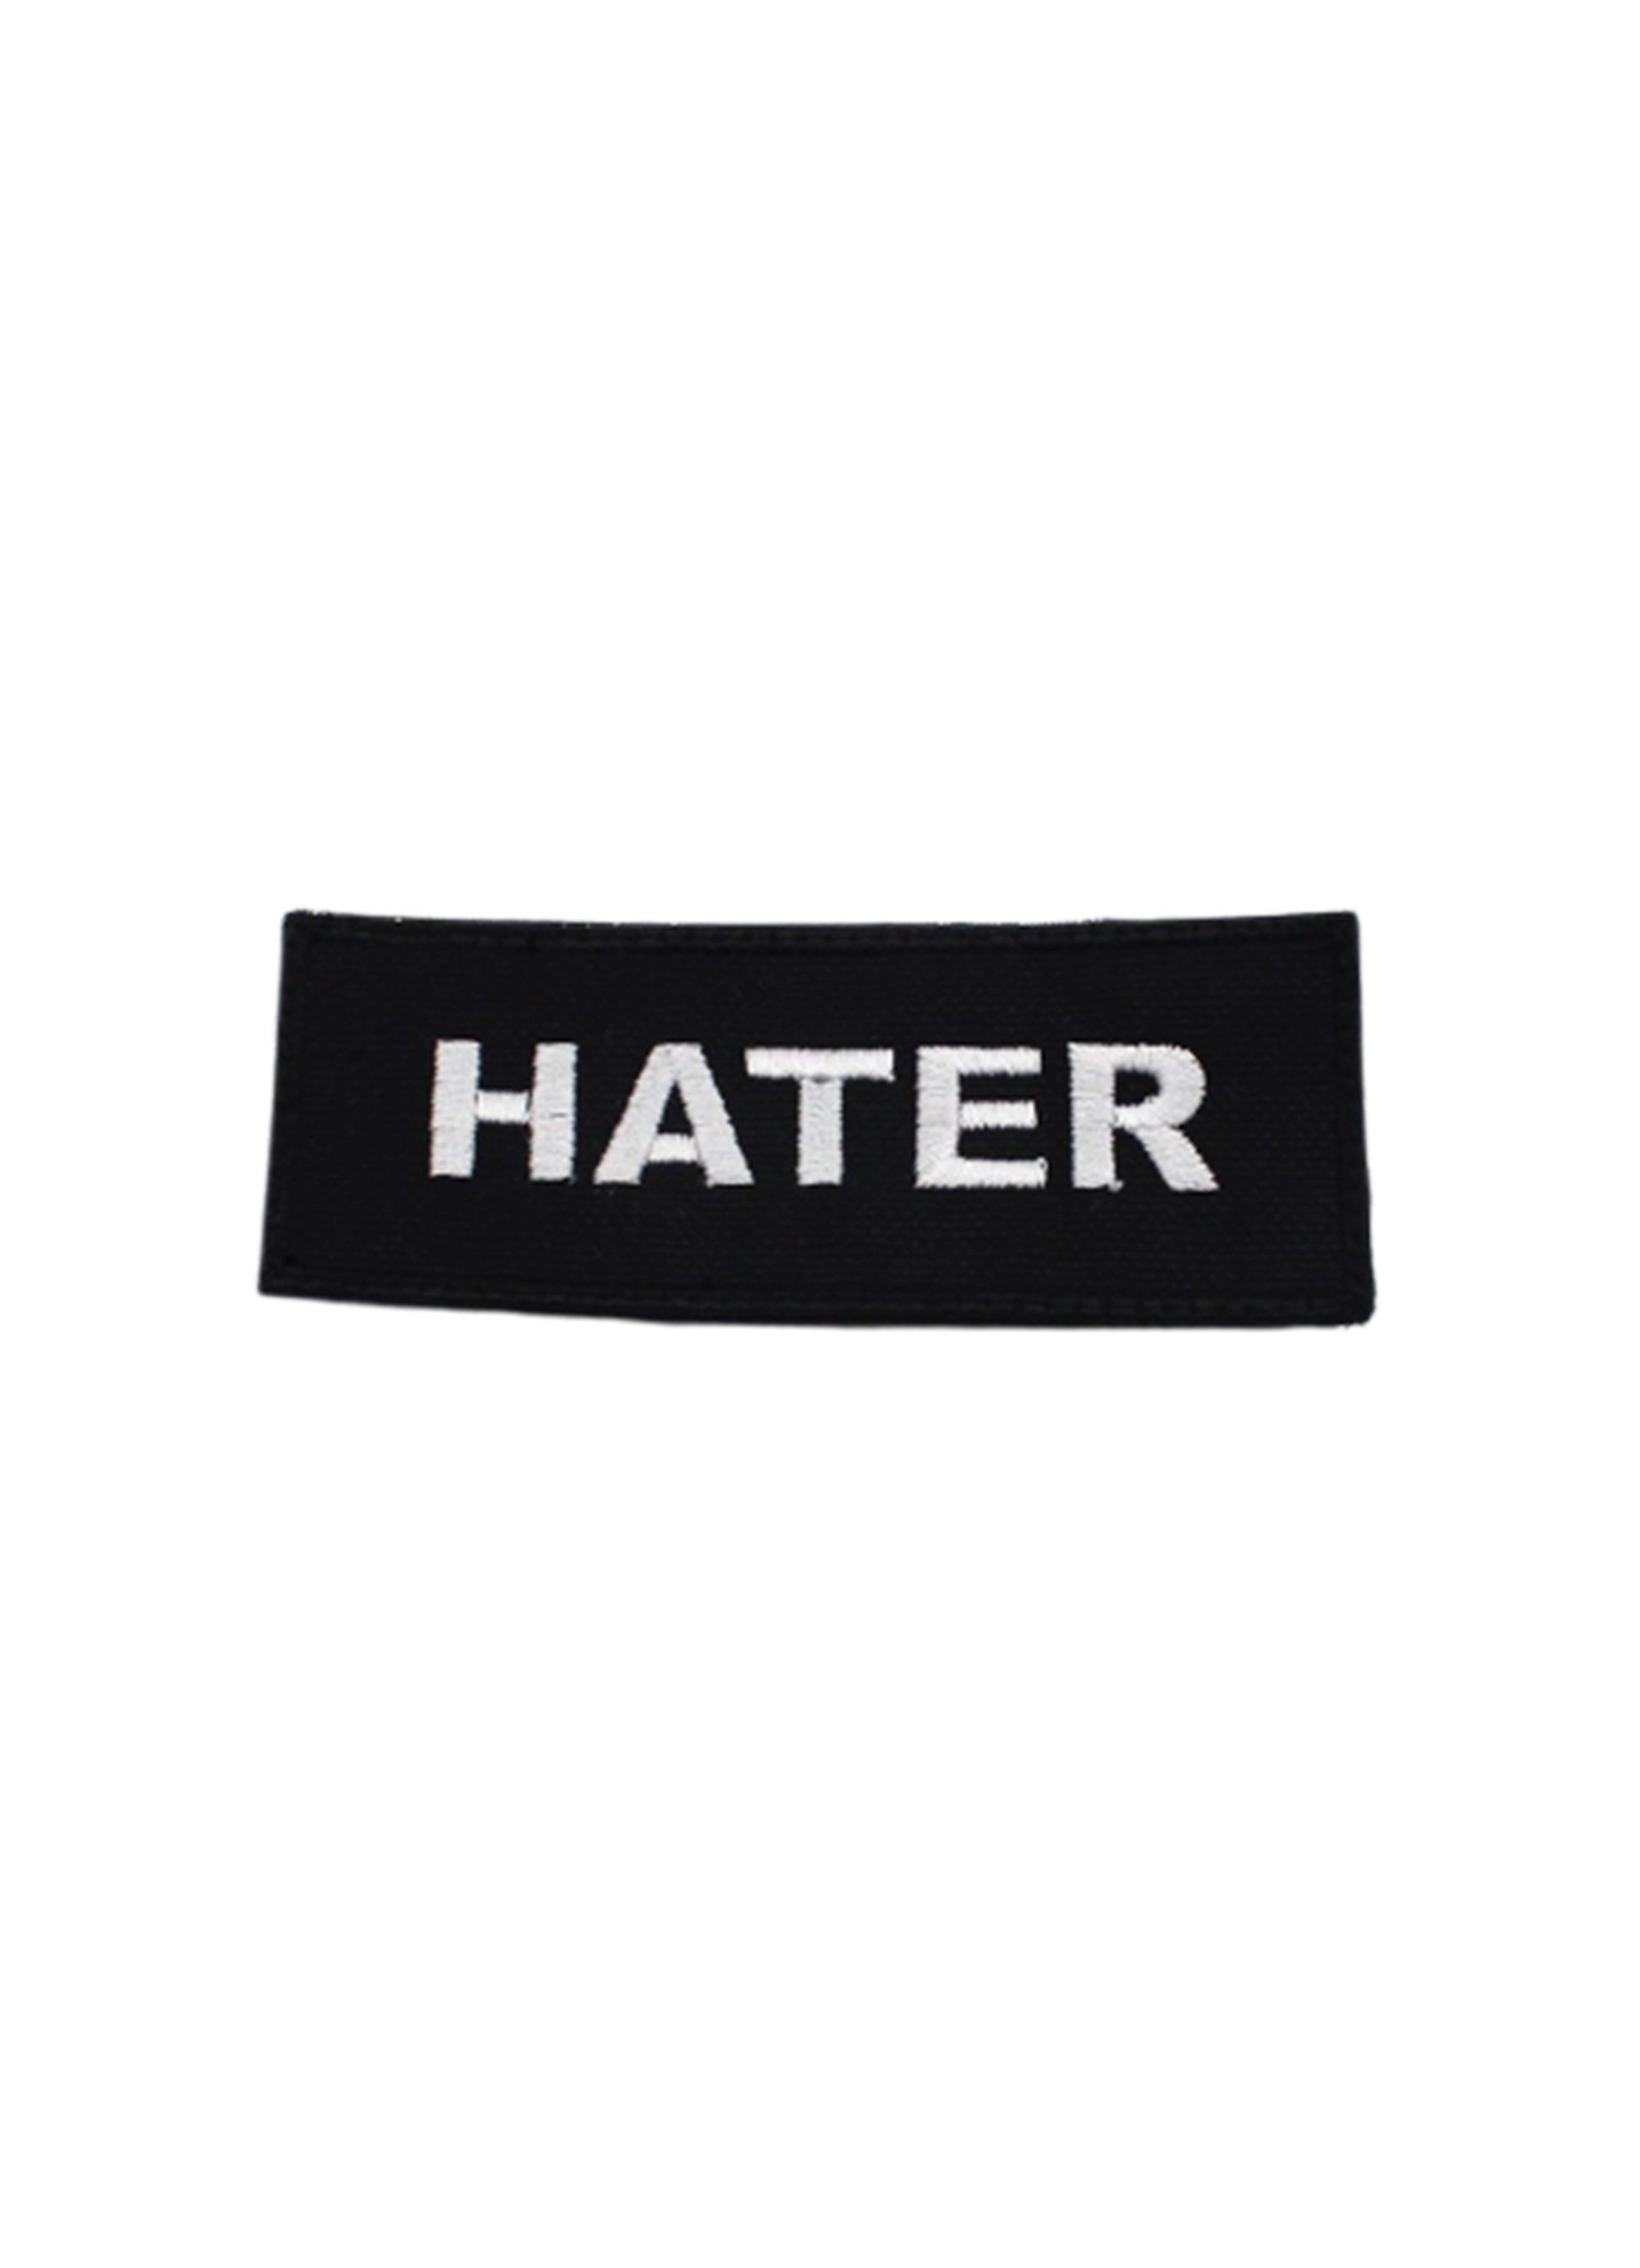 Patch Hater